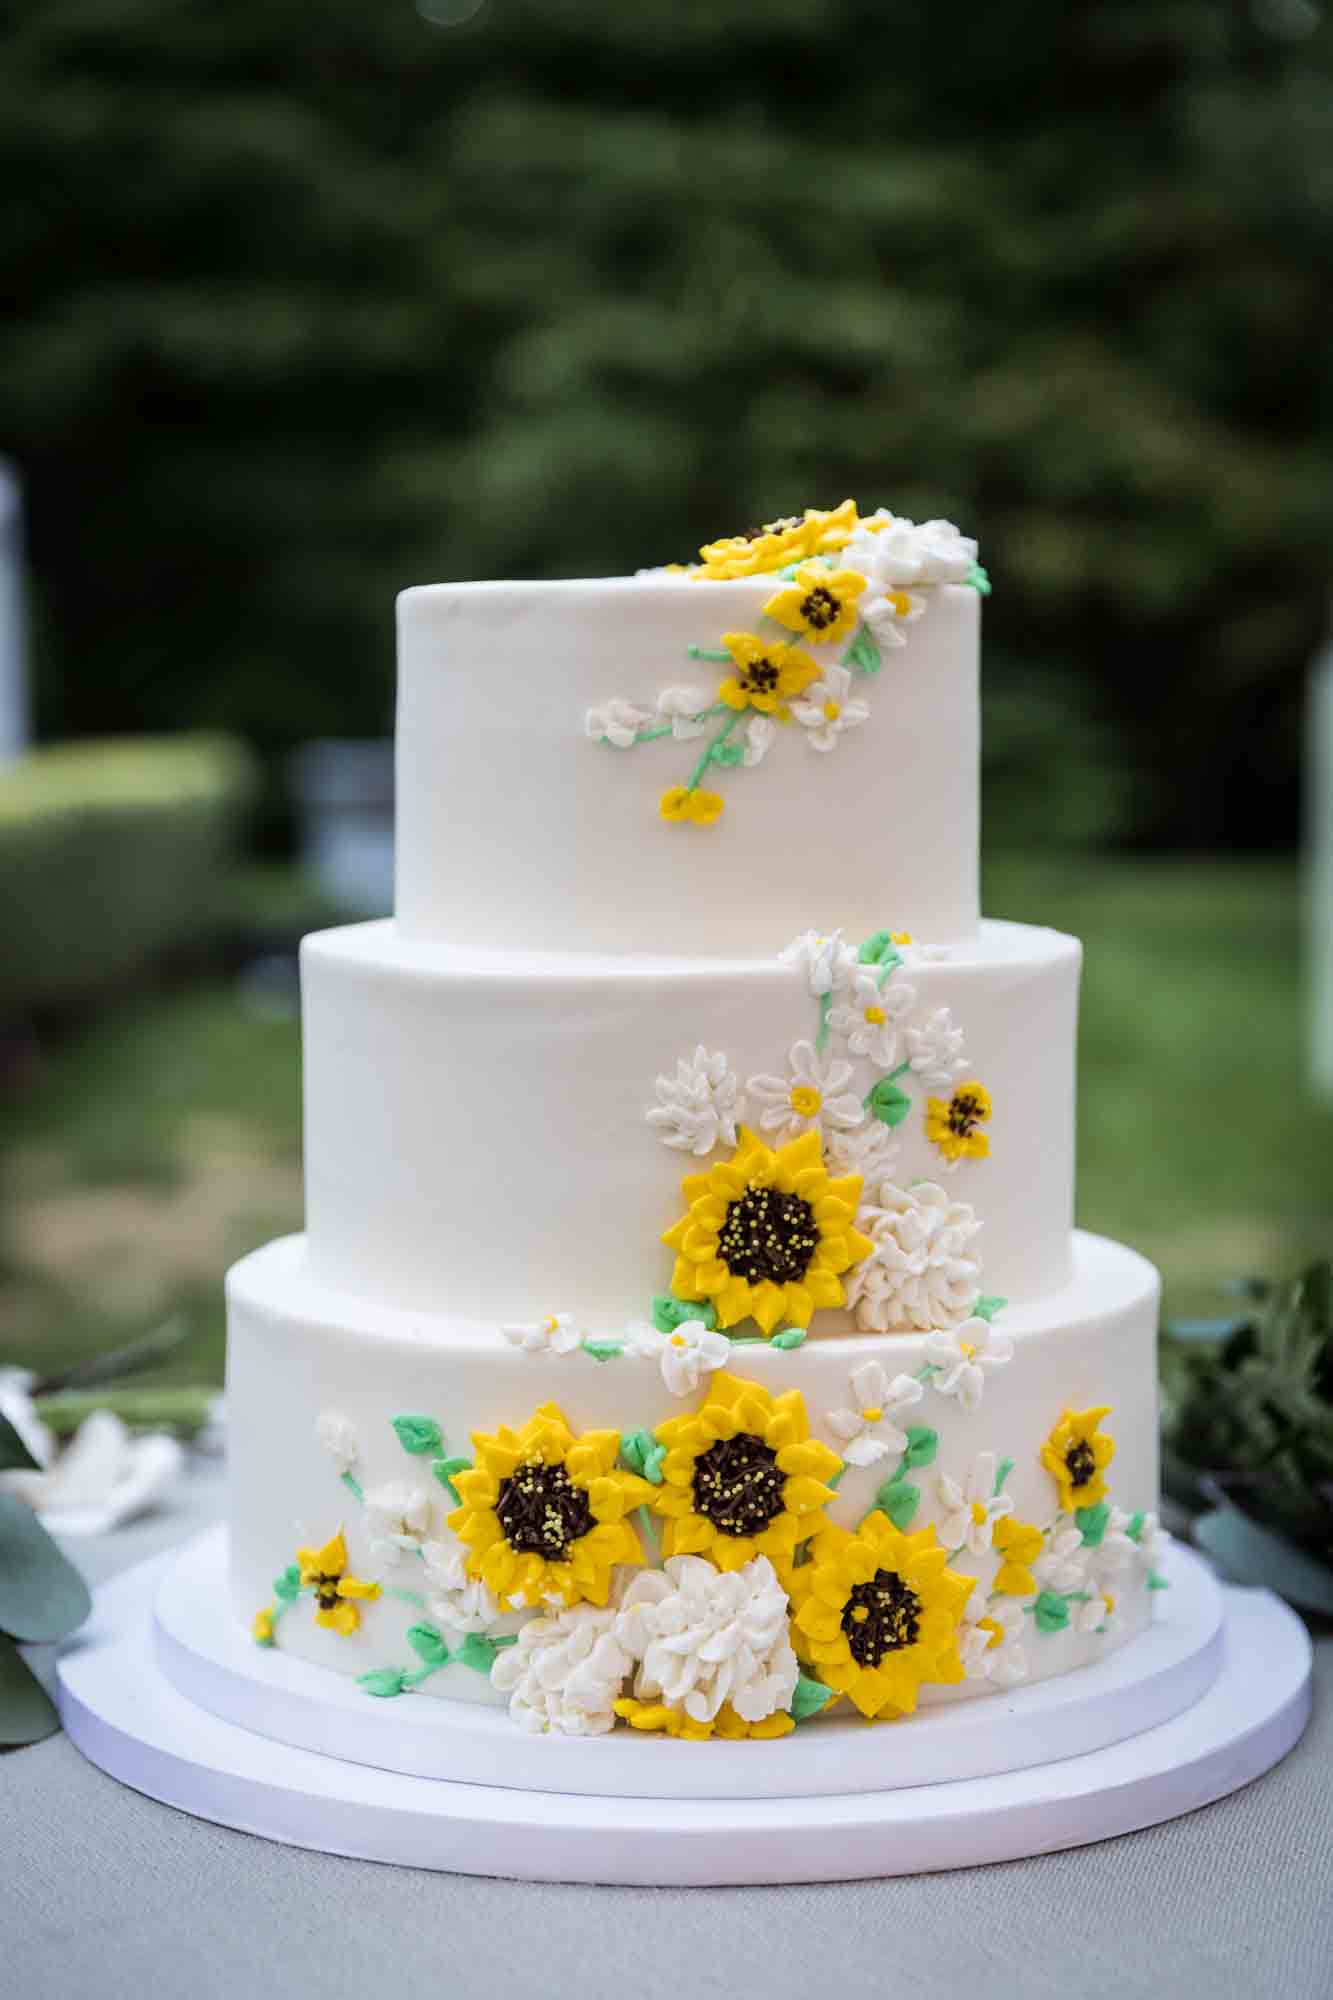 Wedding cake decorated with daisies made of frosting